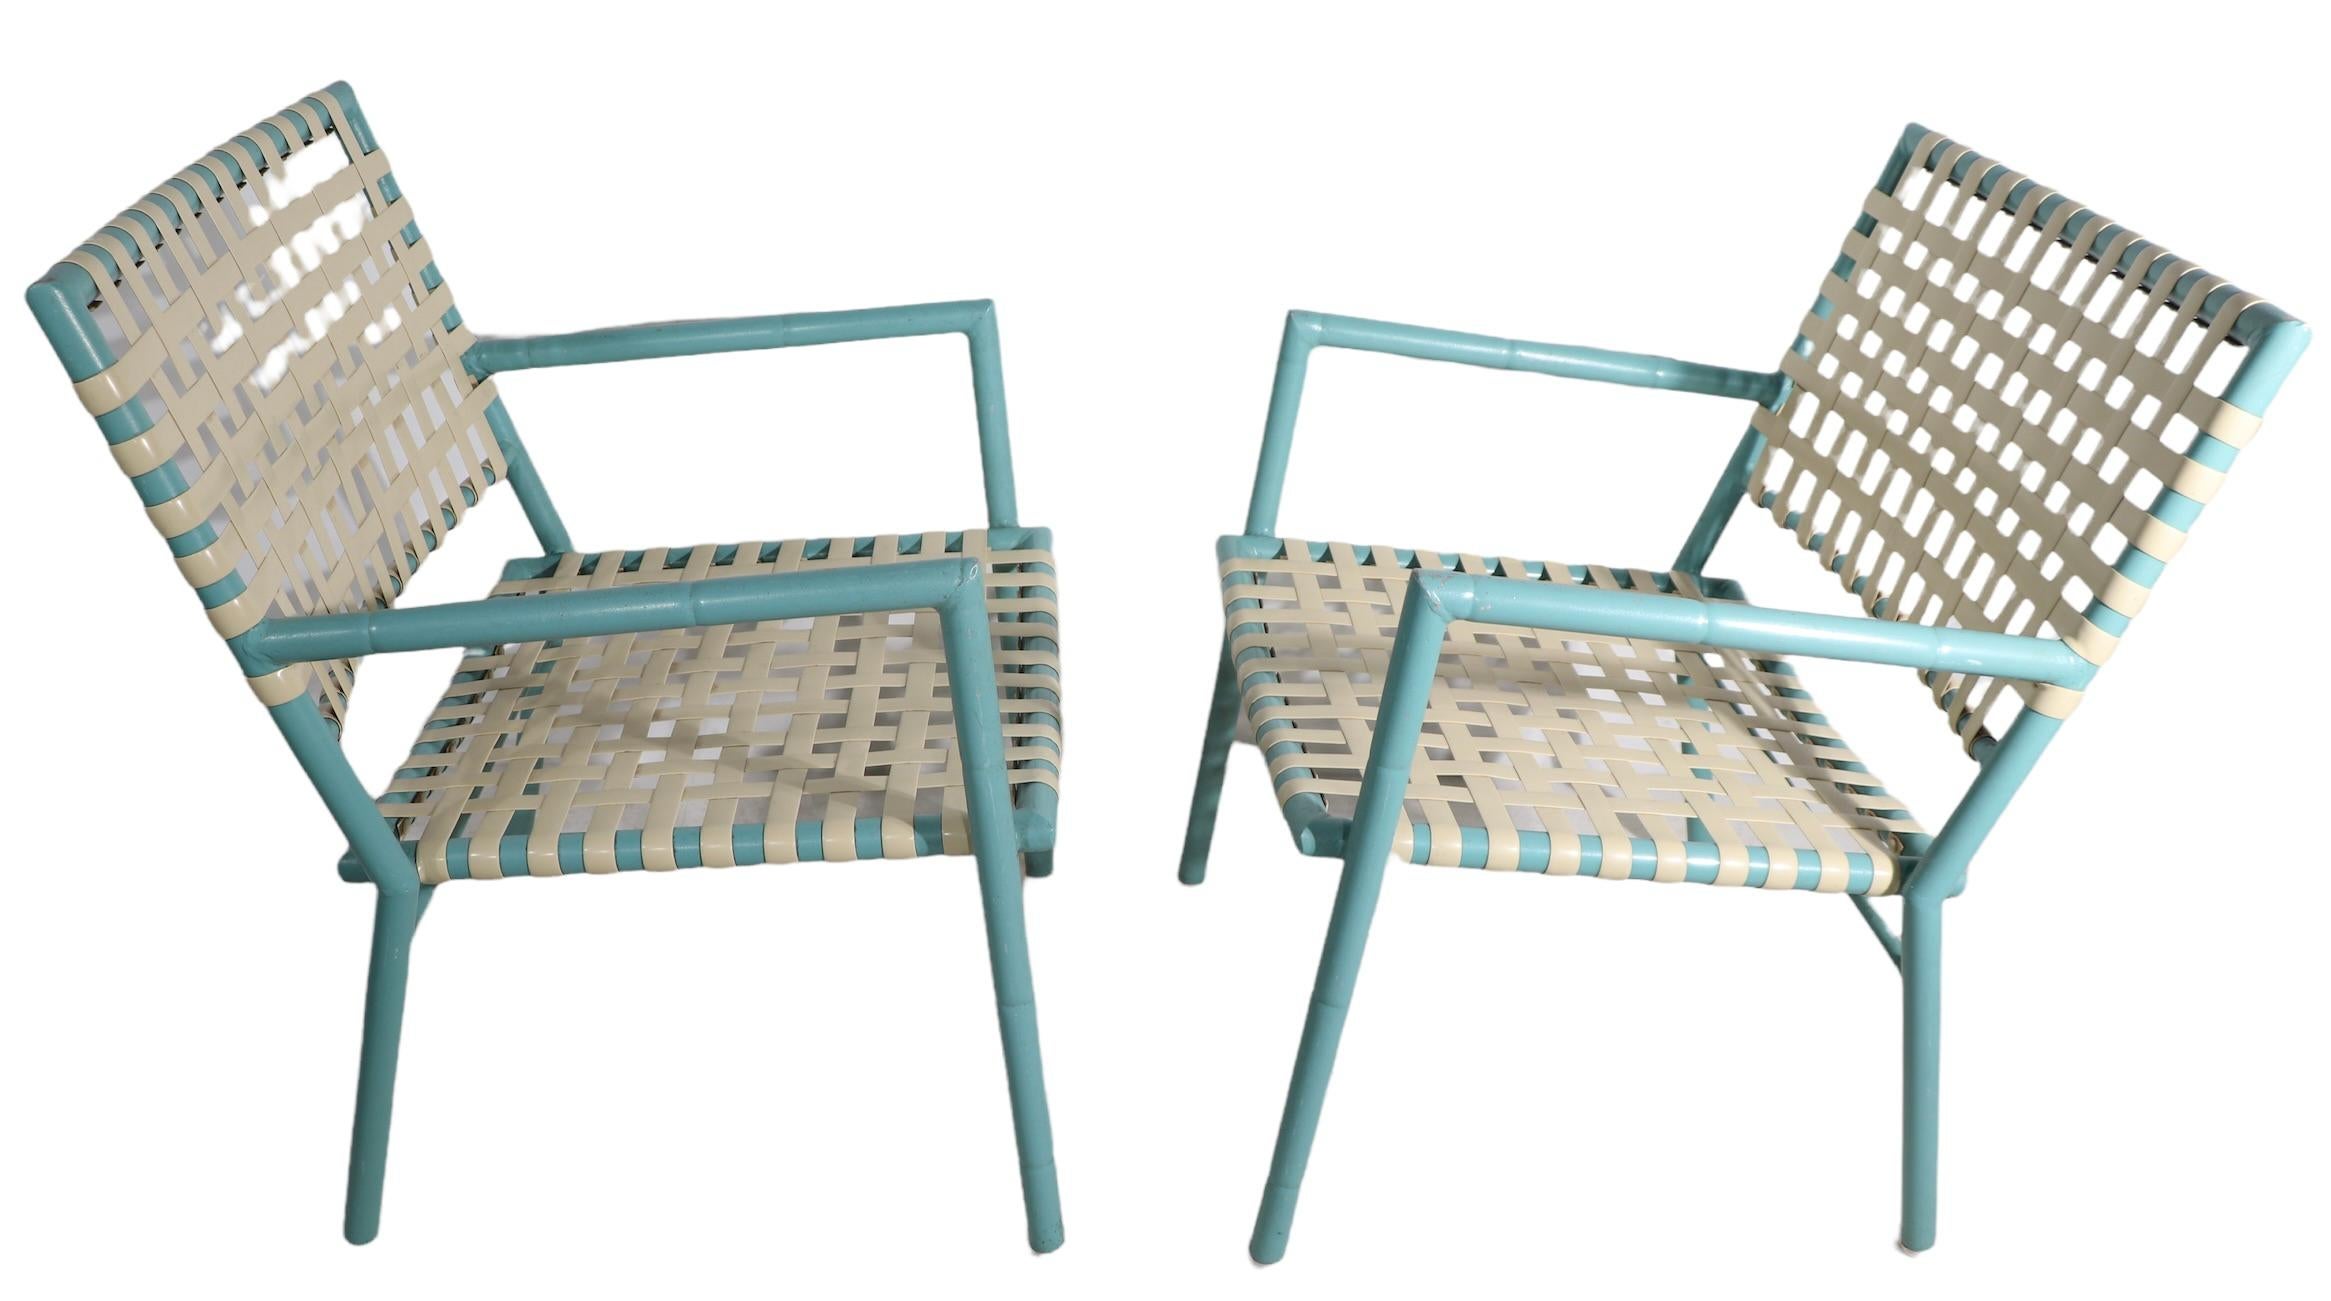 American Pr. Faux Bamboo Poolside Garden Patio Lounge Chairs by Hauser ca. 1970's For Sale